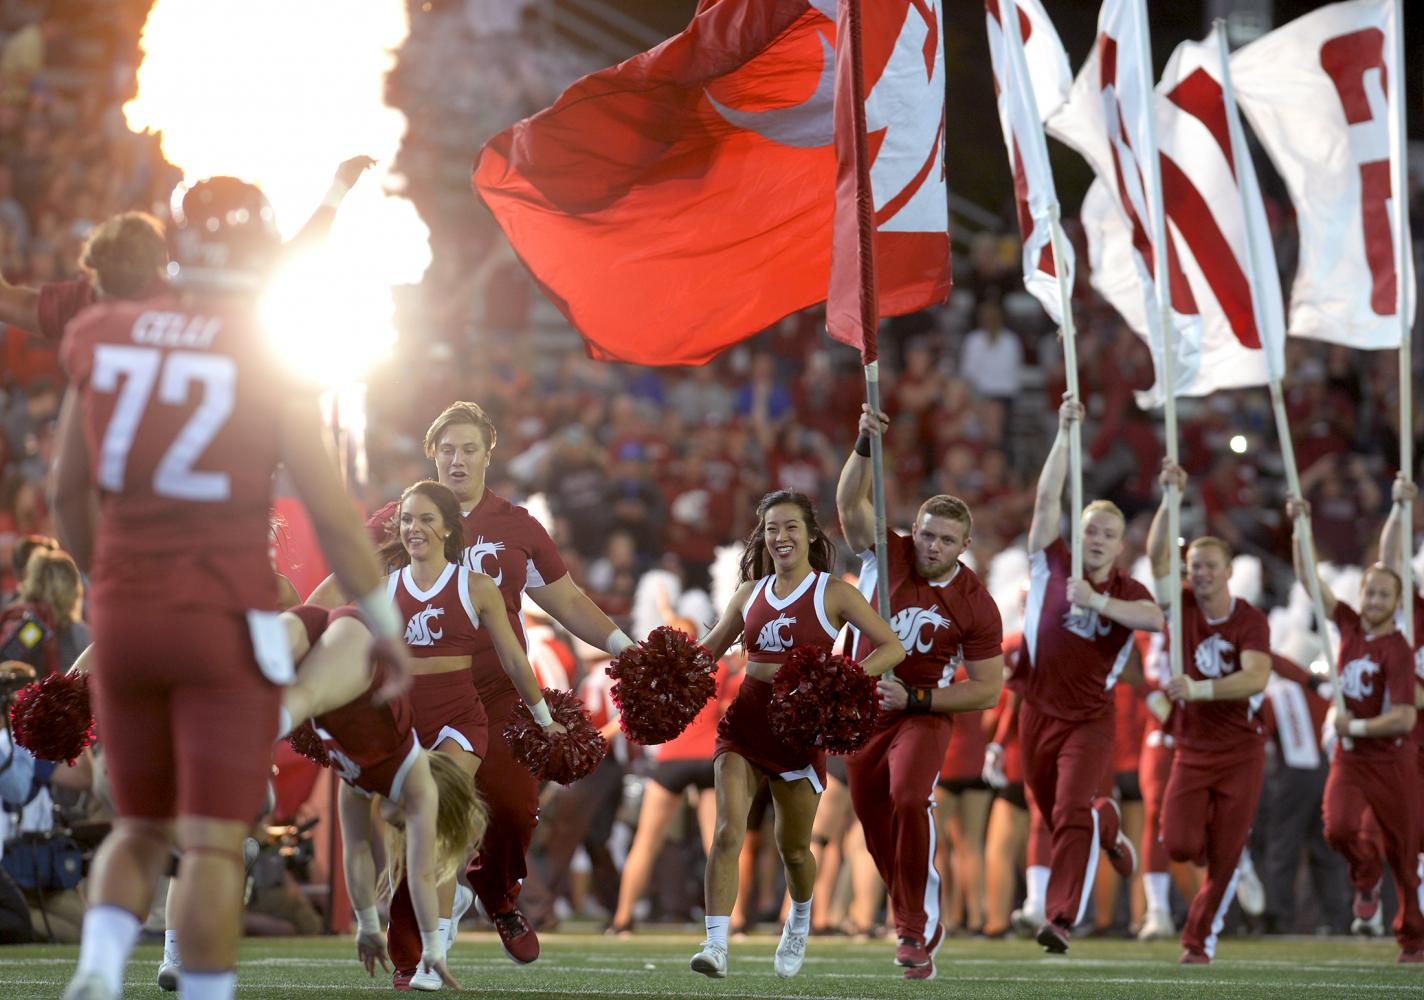 WSU Cougar football and cheerleading teams rush onto the field at the start of the game against Boise State University at Martin Stadium on Sept. 9.